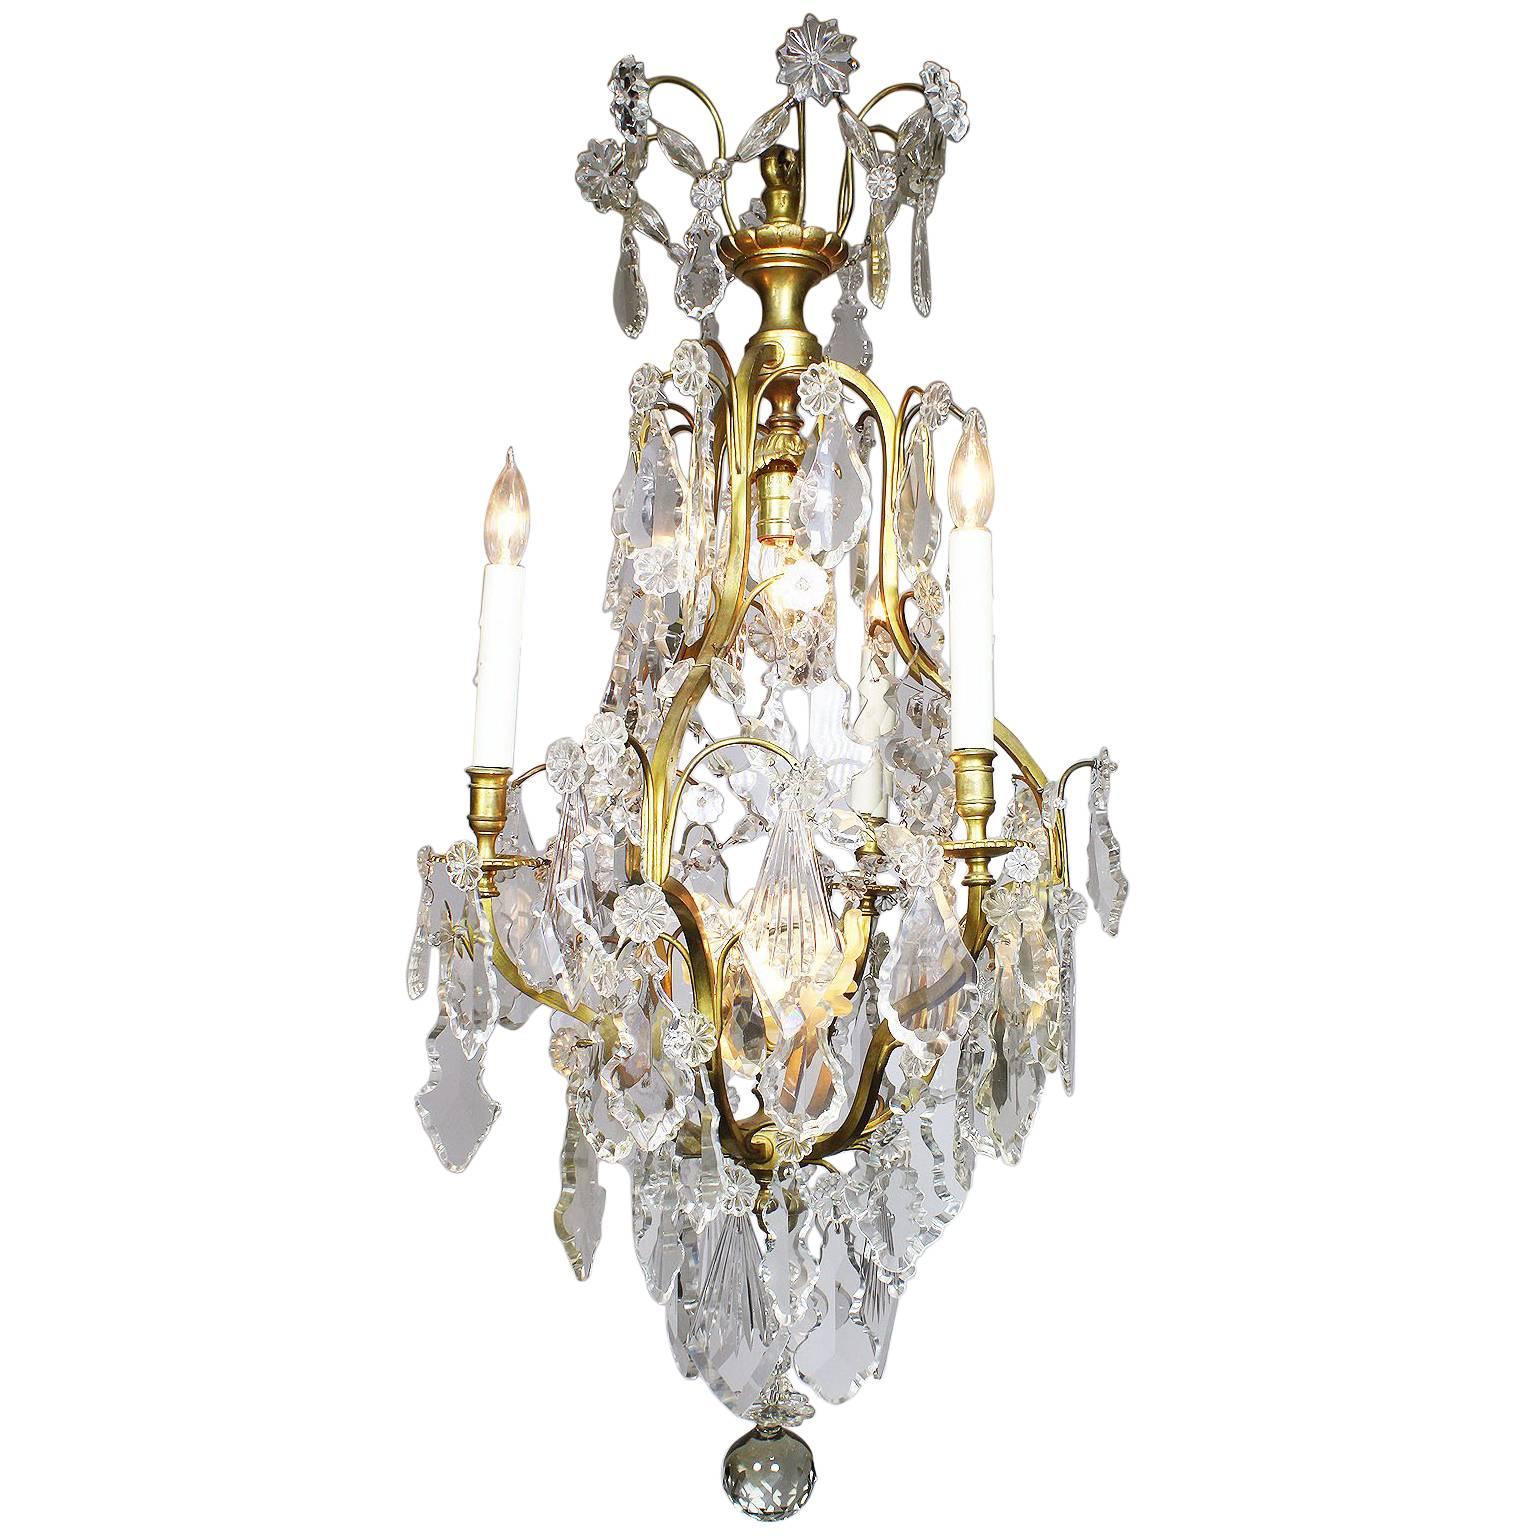 French Early 20th Century Louis XV Style Gilt-Bronze and Cut-Glass Chandelier